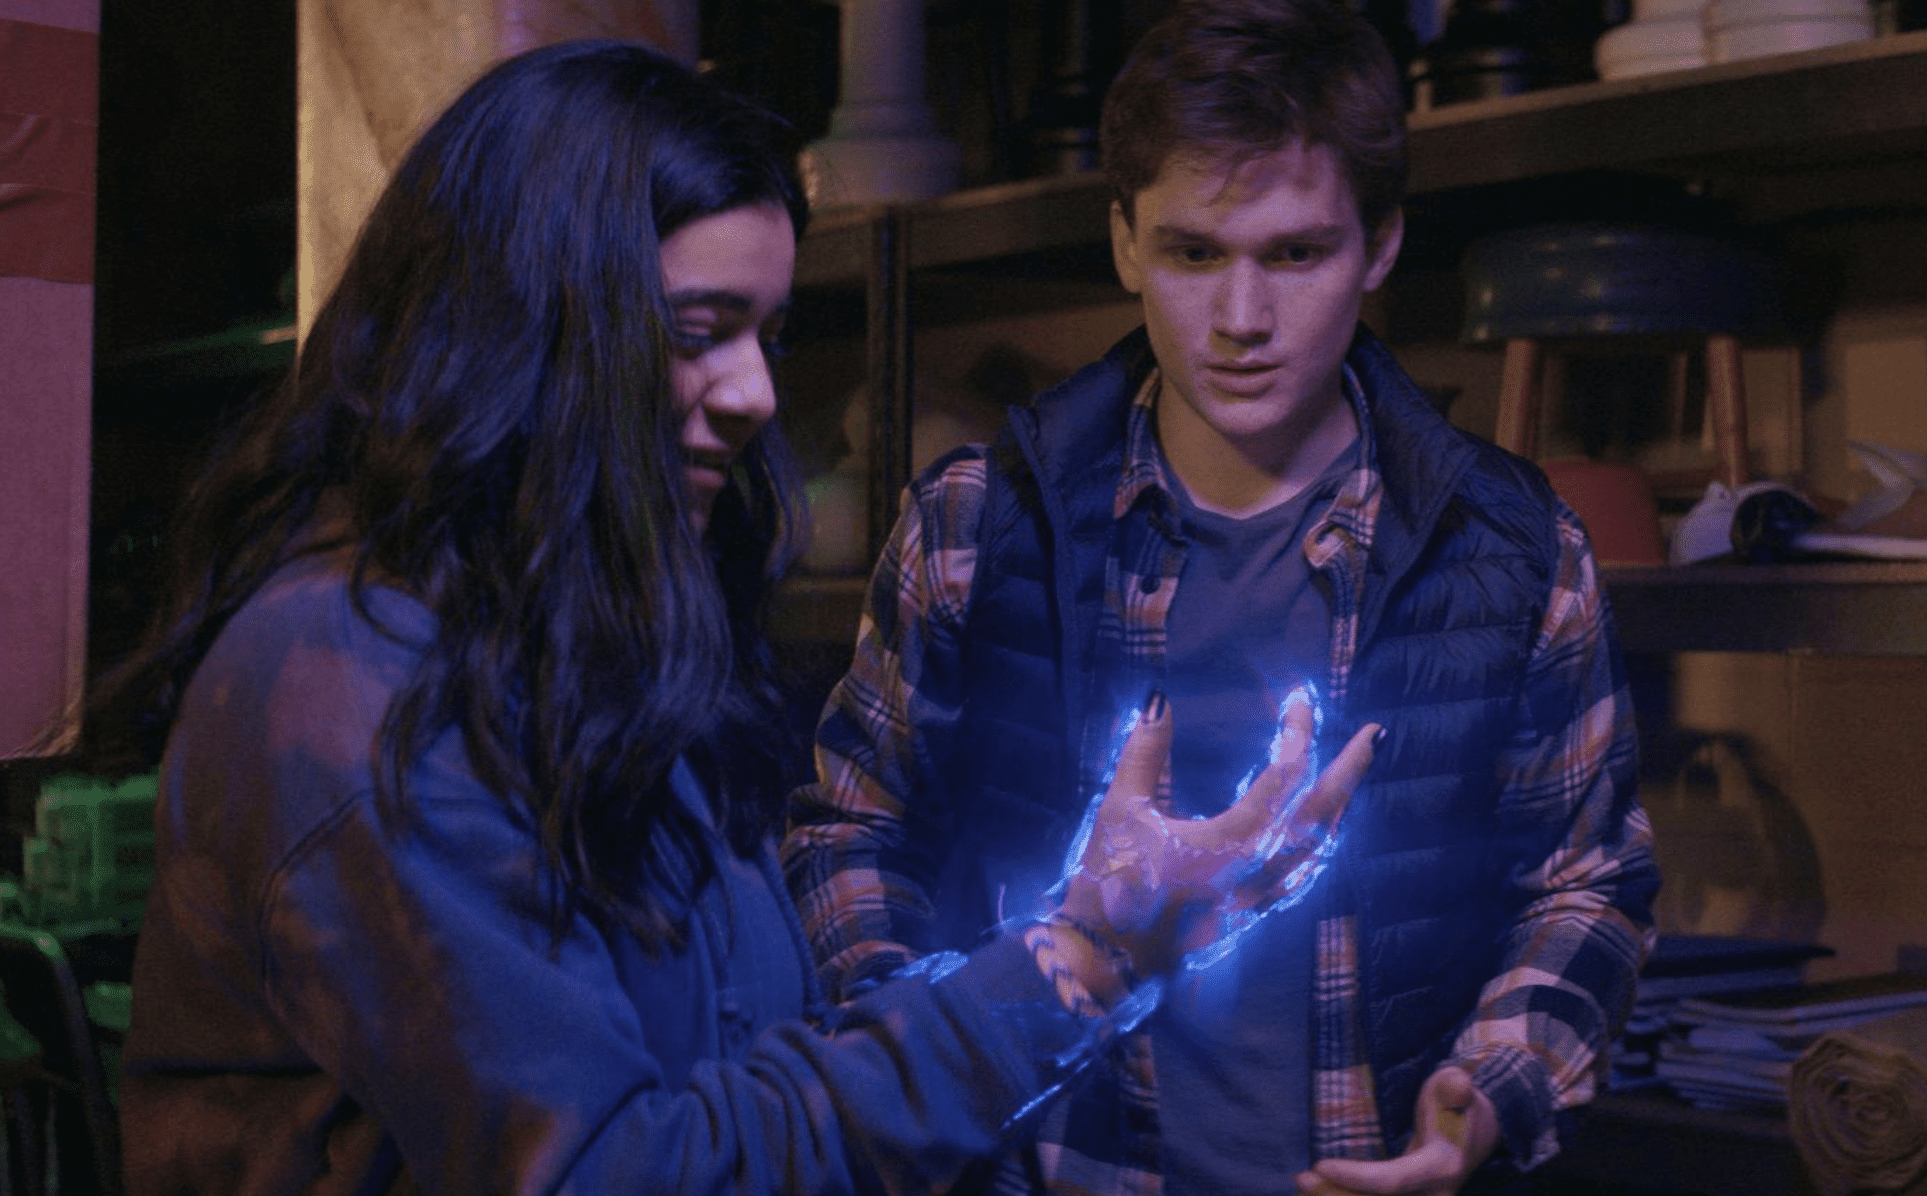 A boy and girl stare at her glowing hand in this image from Marvel Studios.